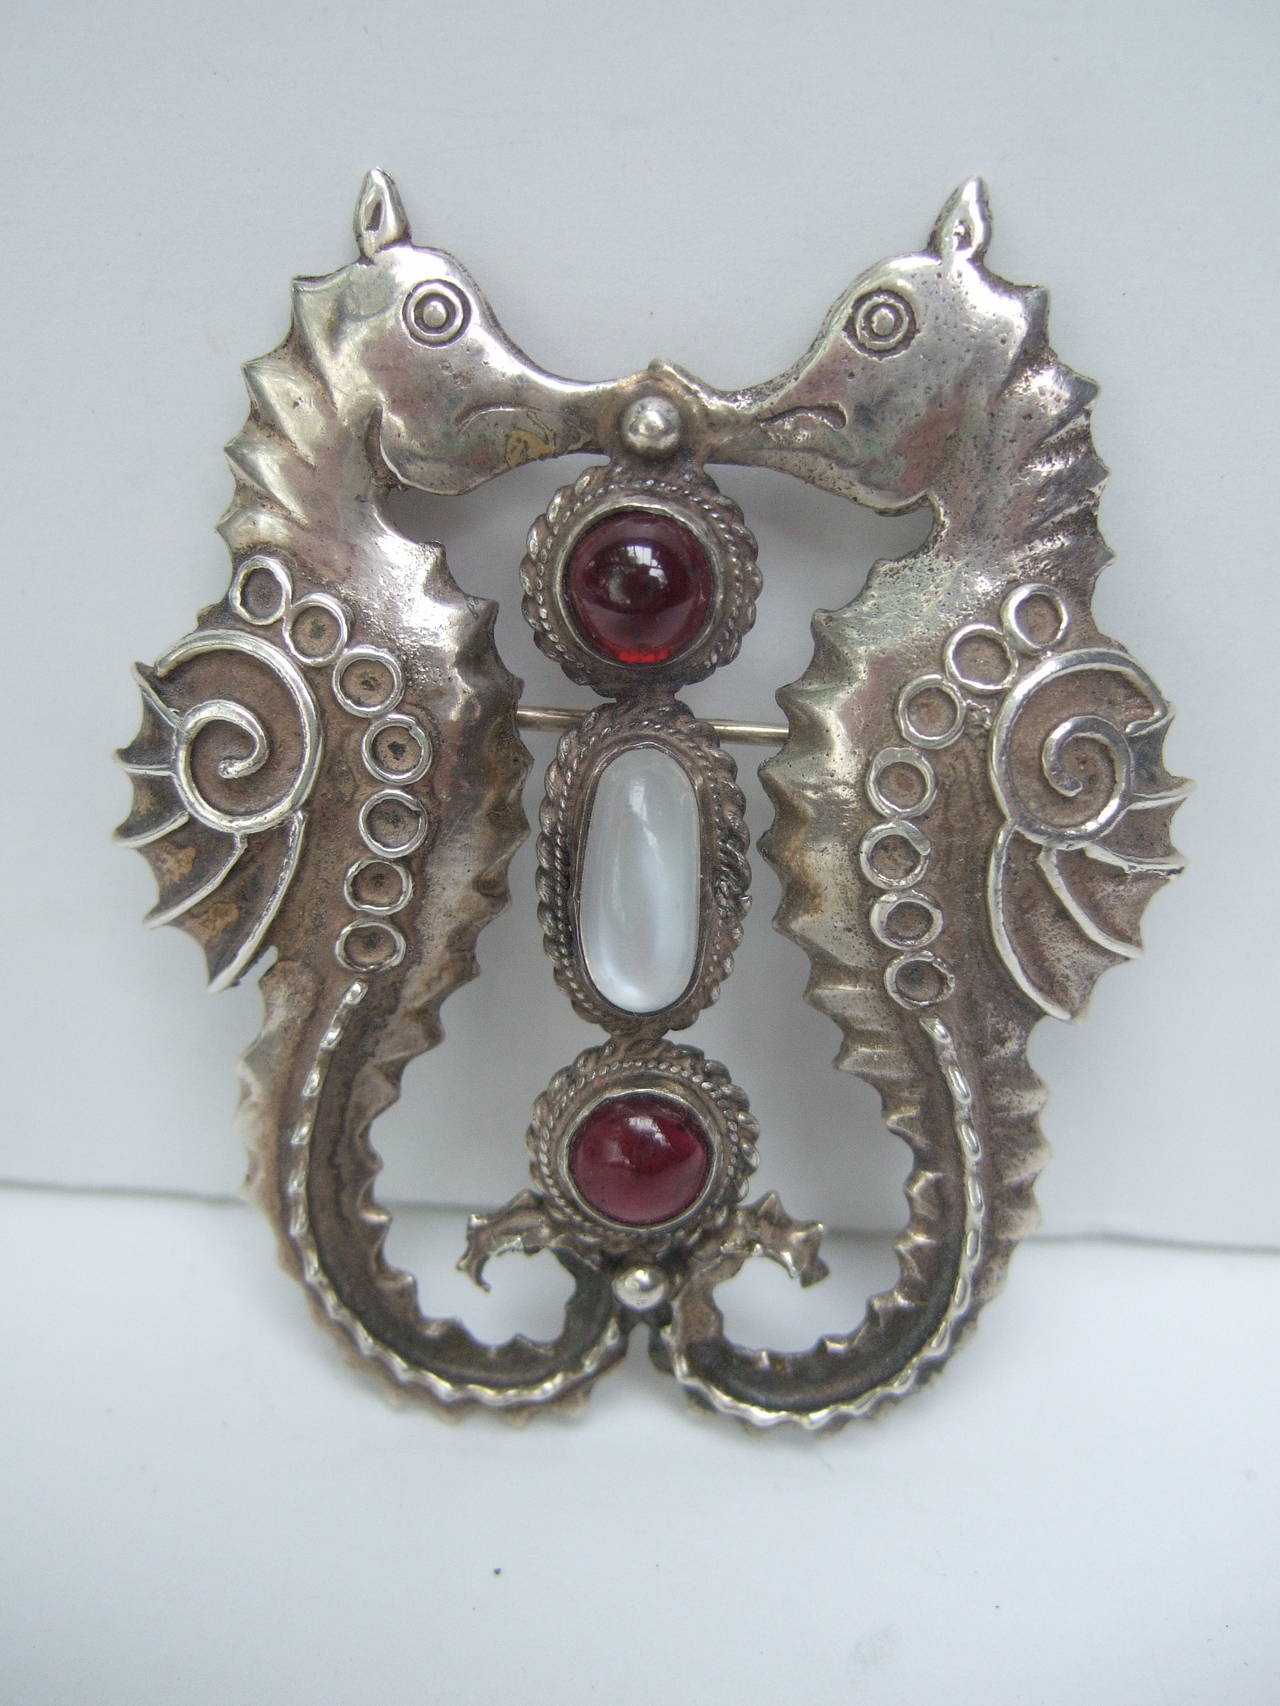 Sterling sea horse figural cabochon brooch c 1970
The handmade artisan brooch is designed with a
pair of stylized sea horses with scrolled circular 
stampings 

The center of the sterling brooch is embellished
with two garnet color round glass